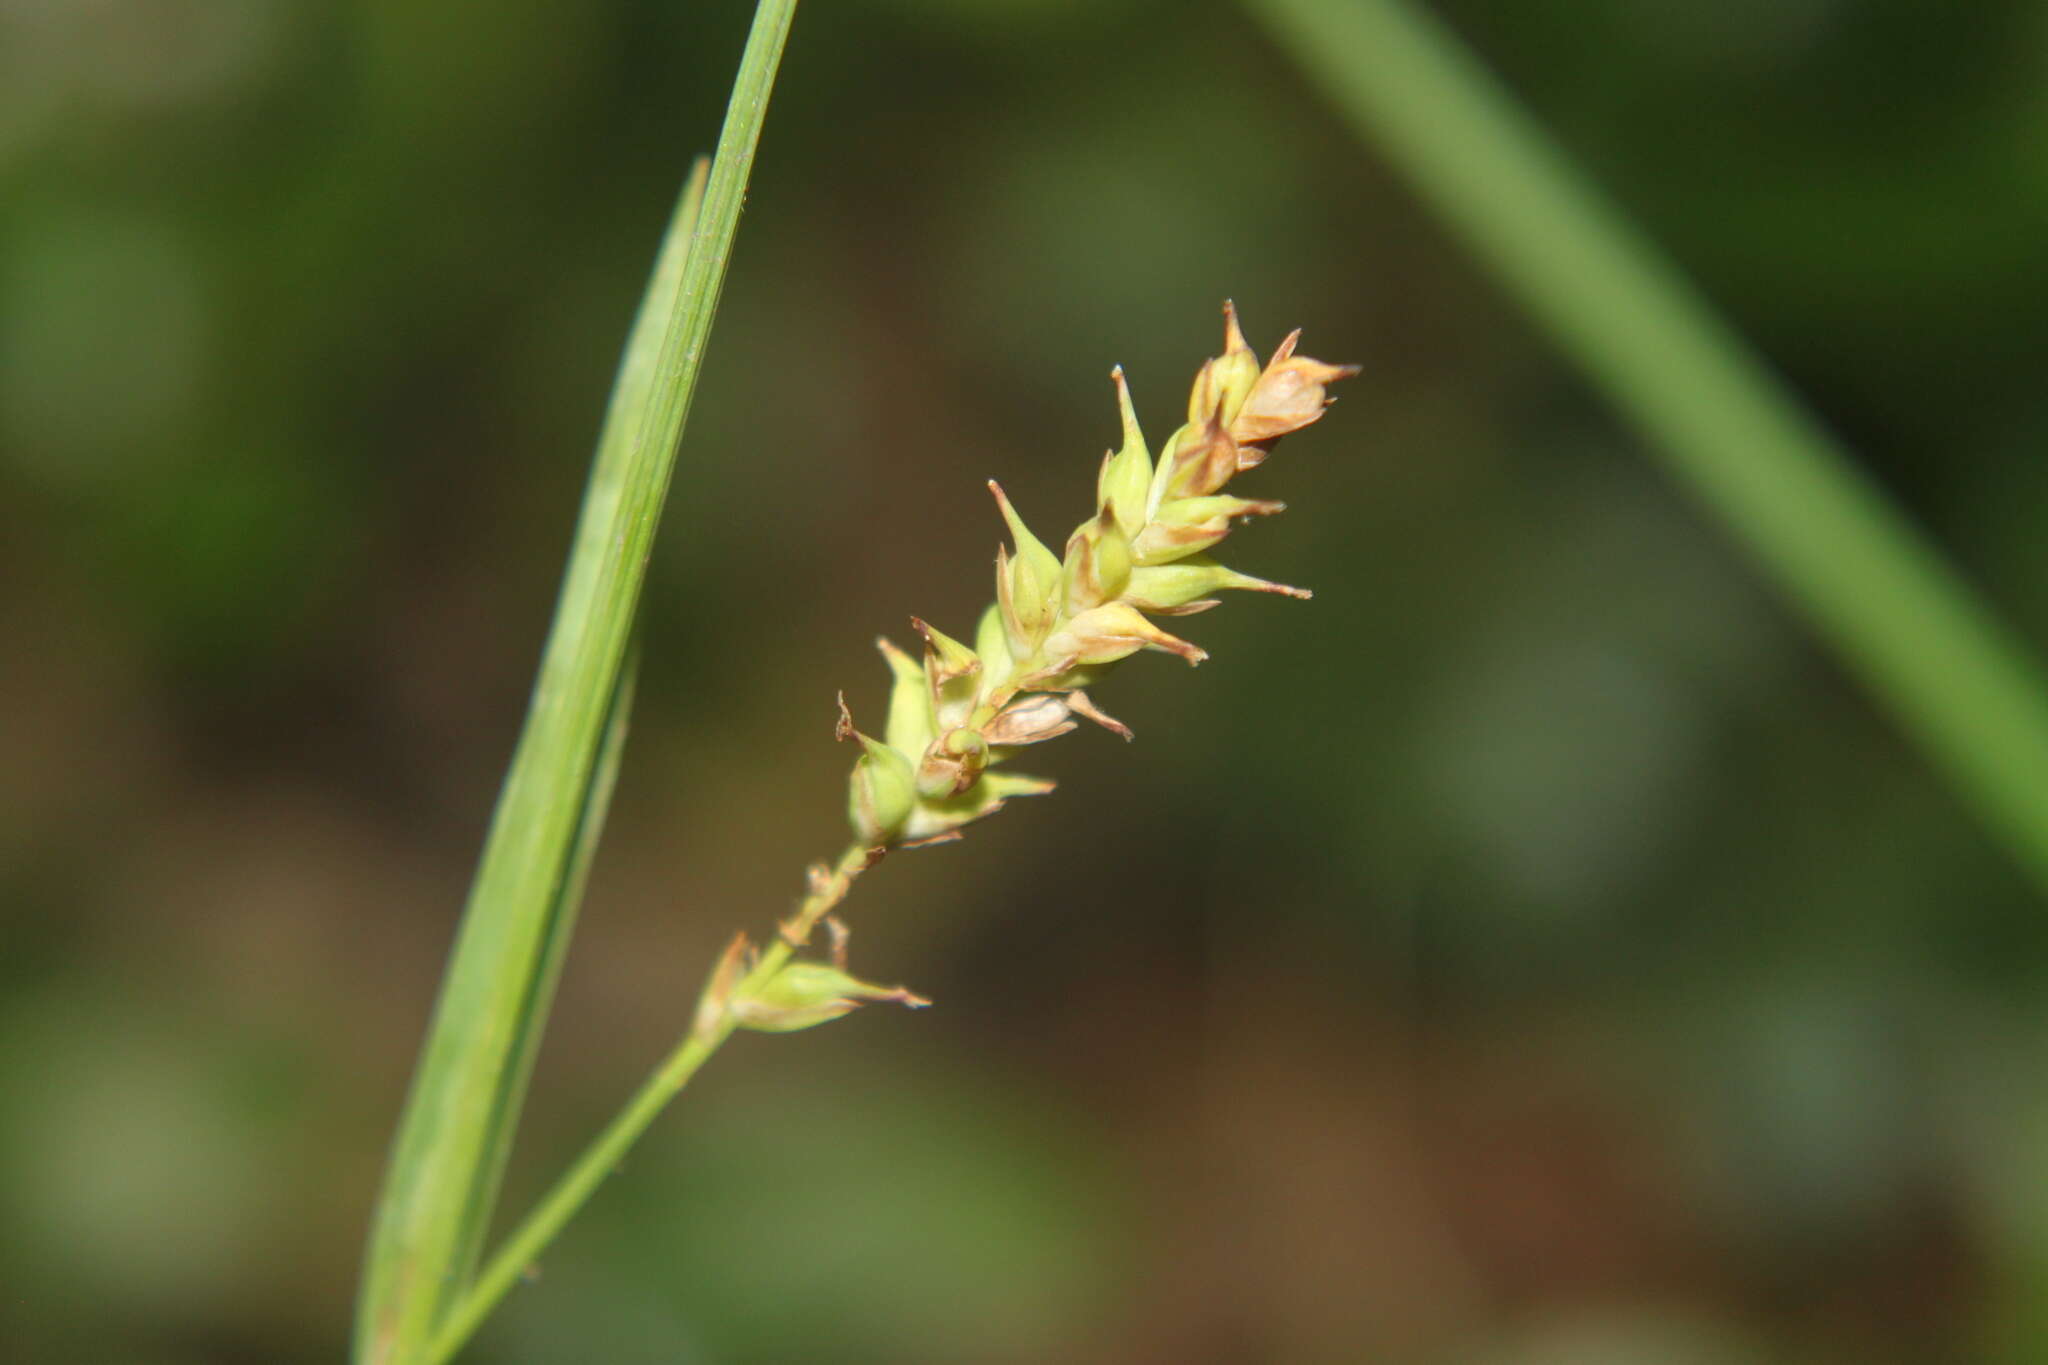 Image of variable sedge